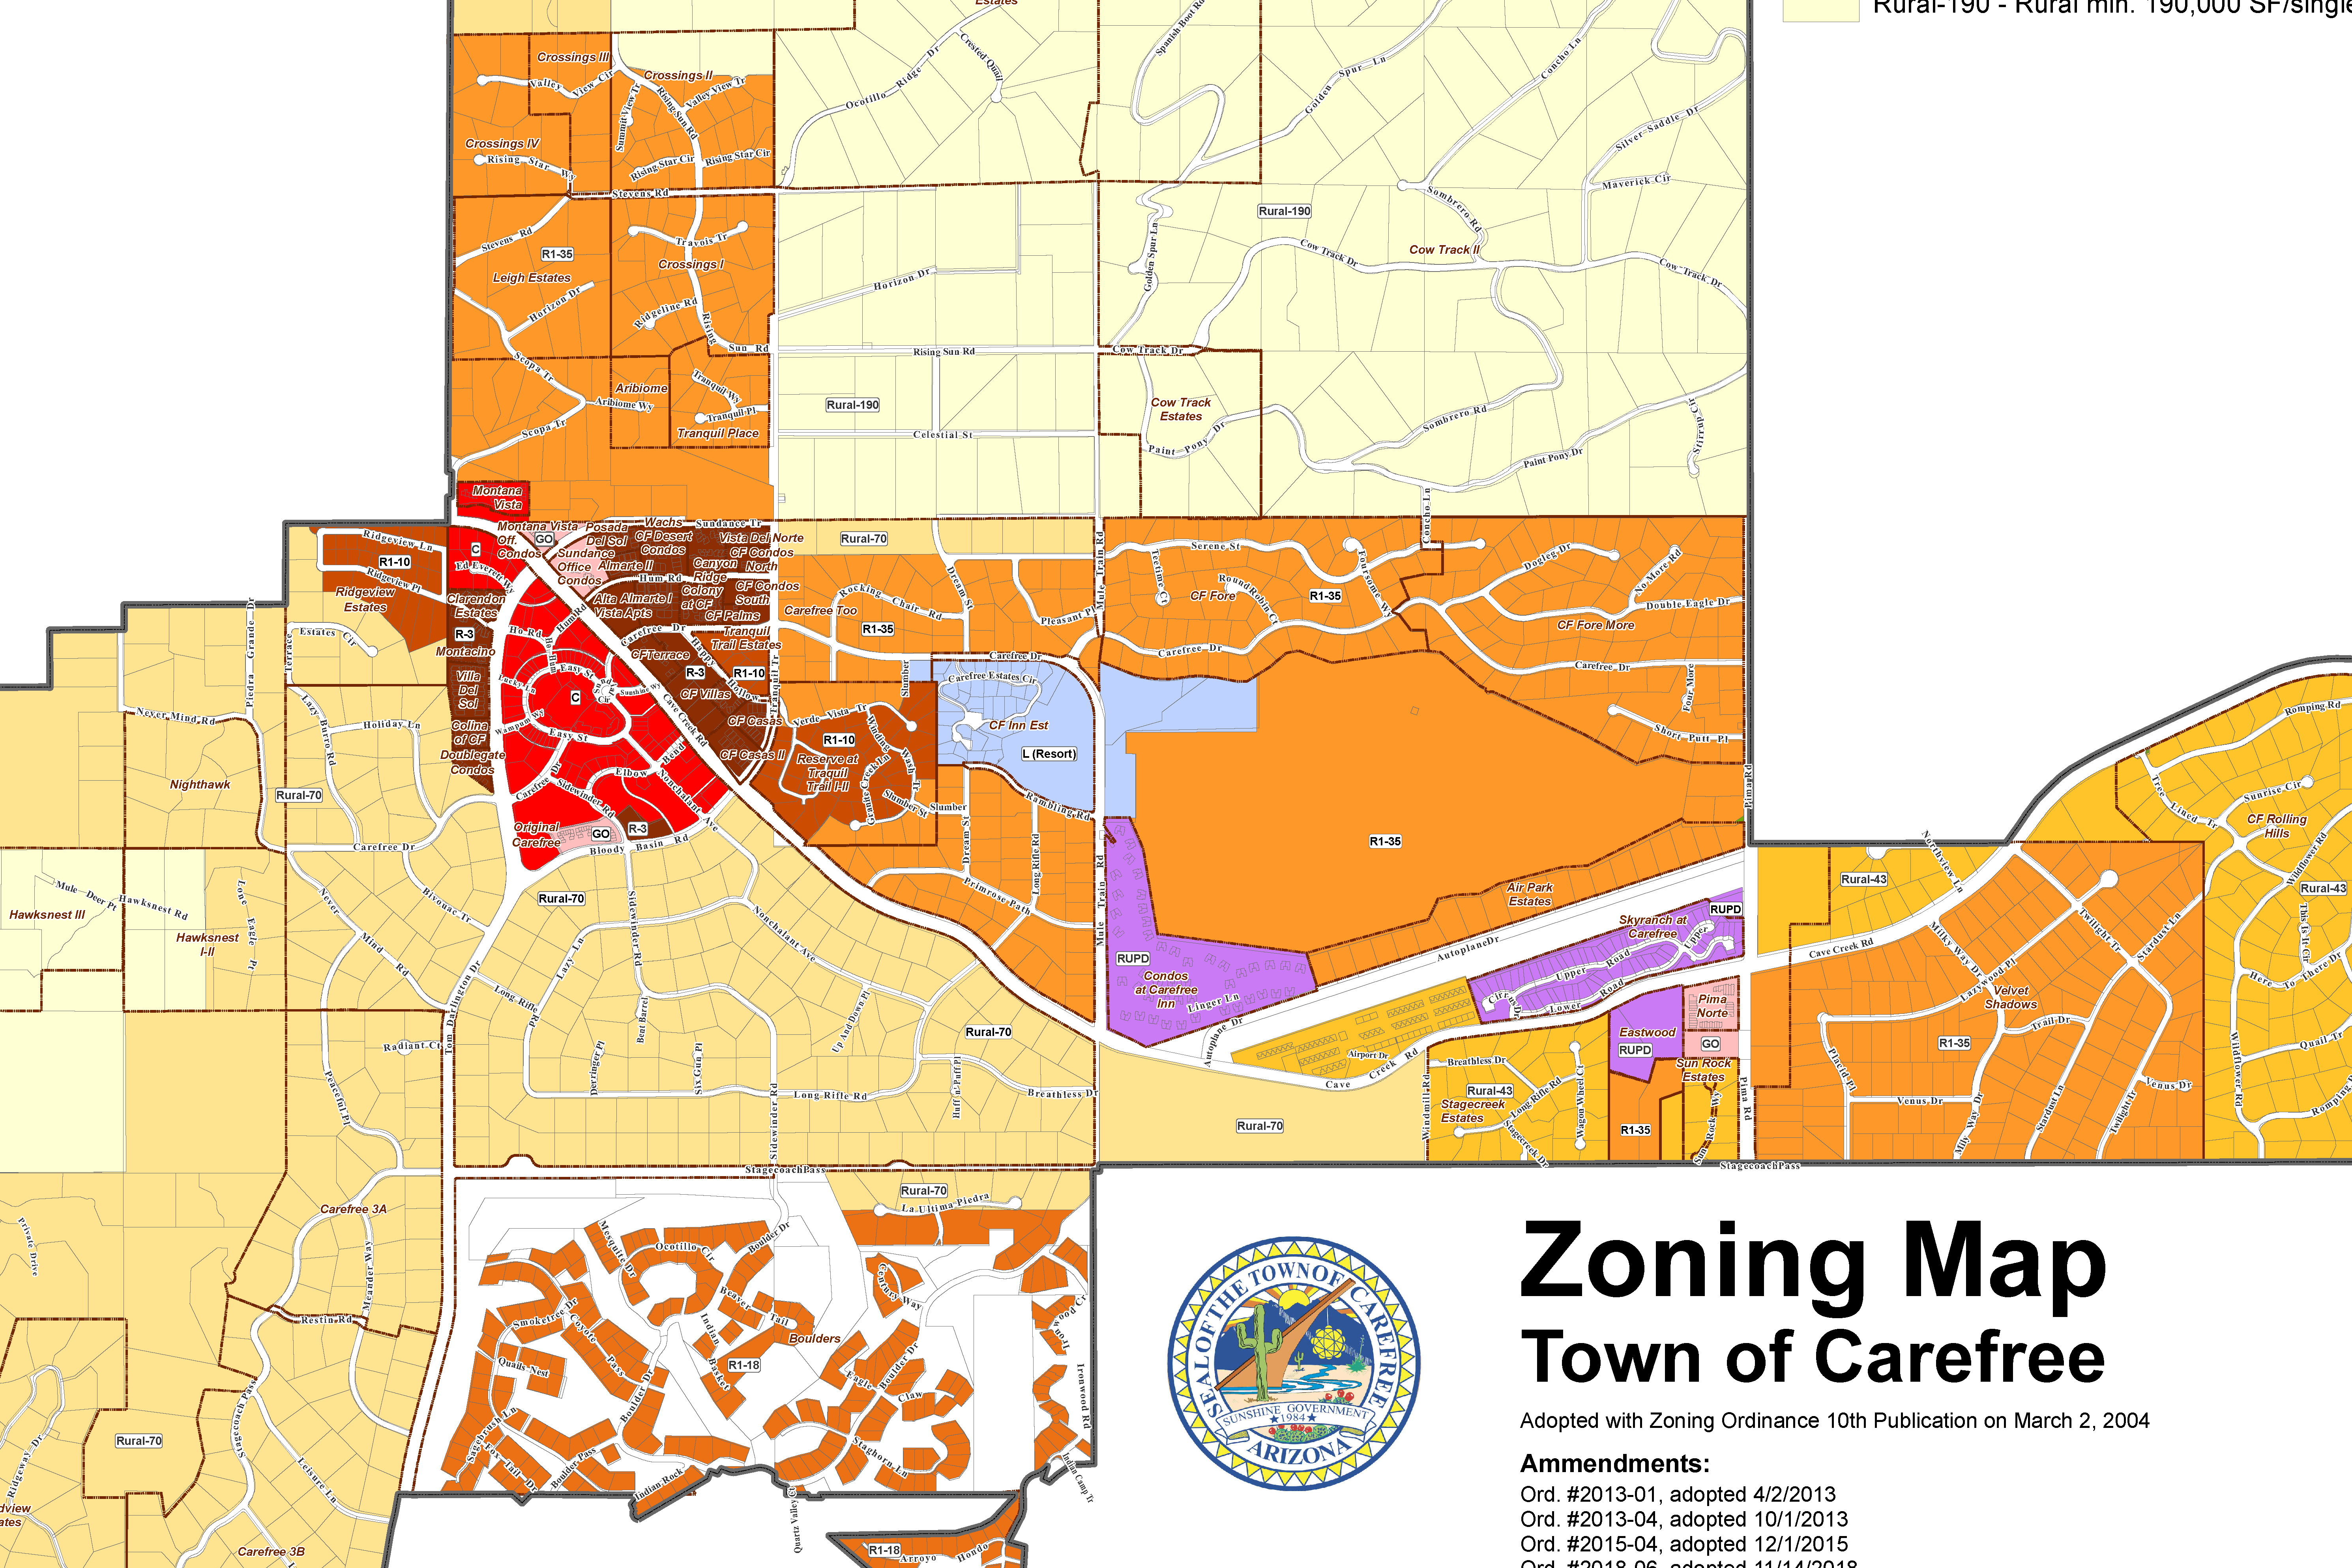 Picture of the Zoning Map of Carefree